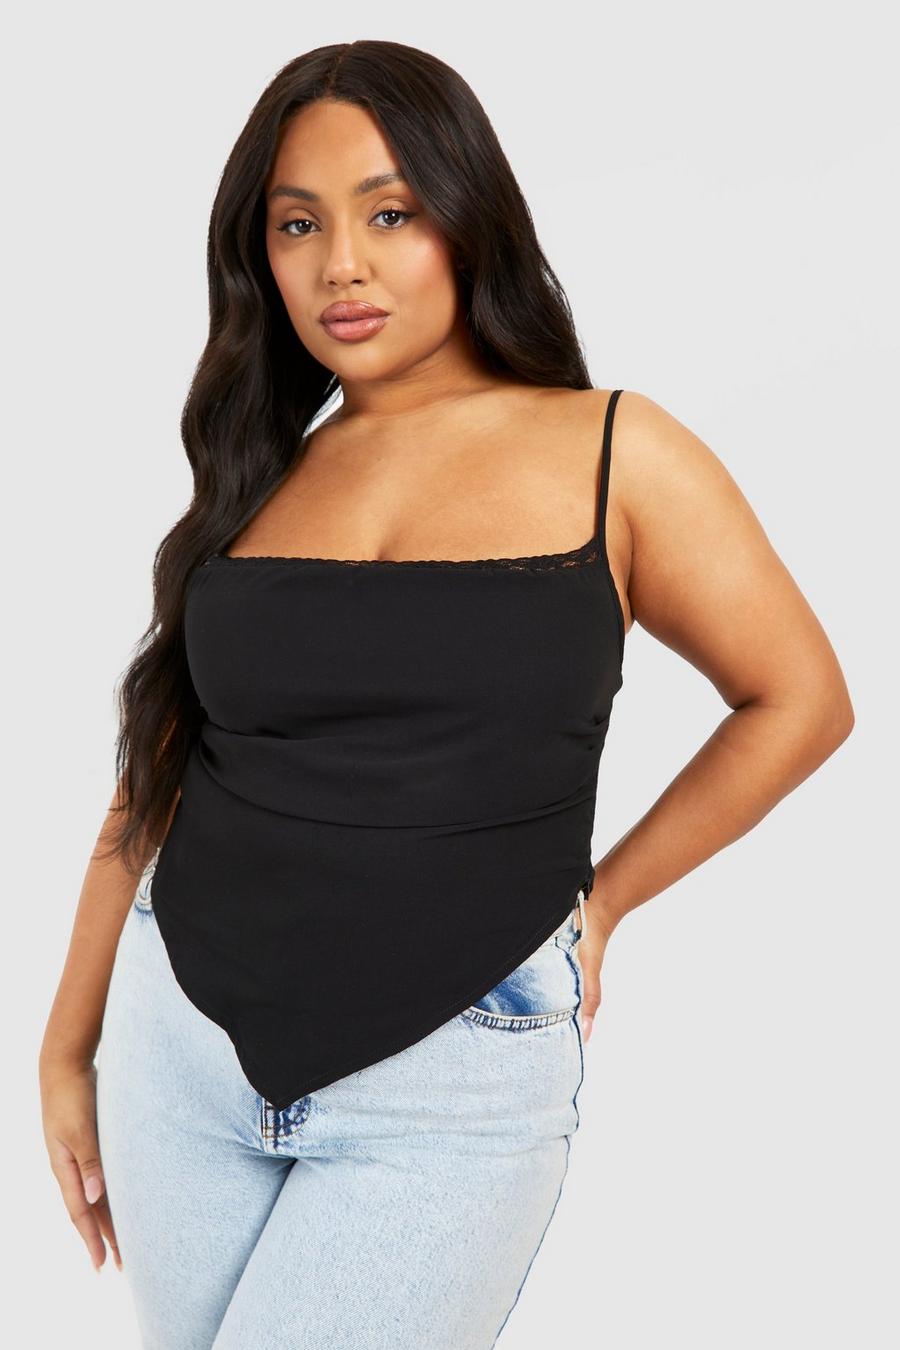  CARCOS Womens Plus Size Cami